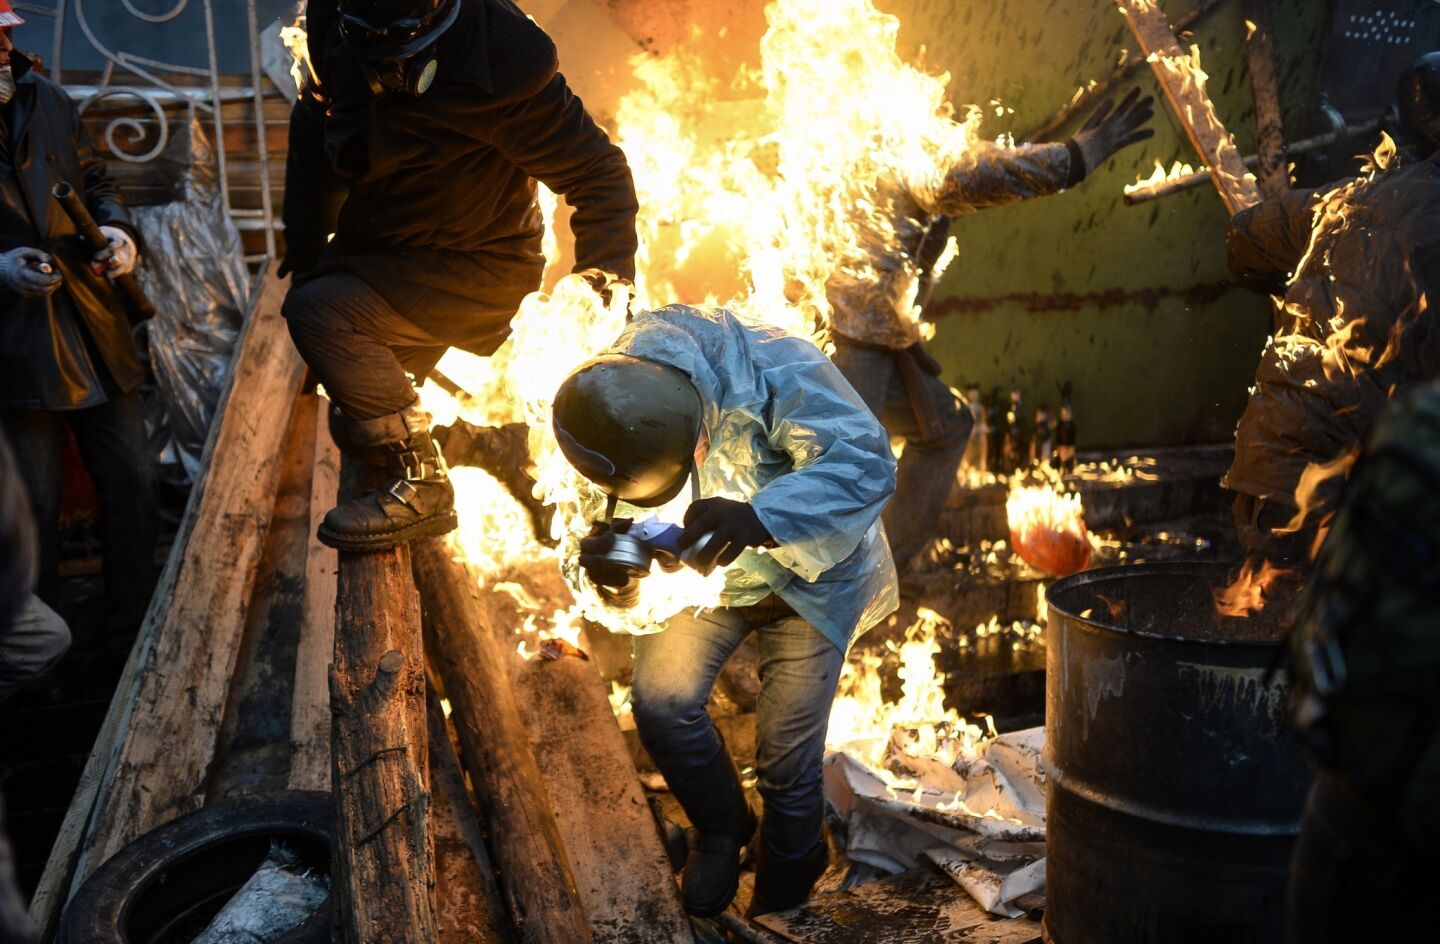 Protesters catch fire as they stand behind burning barricades during clashes with police in Kiev, Ukraine.